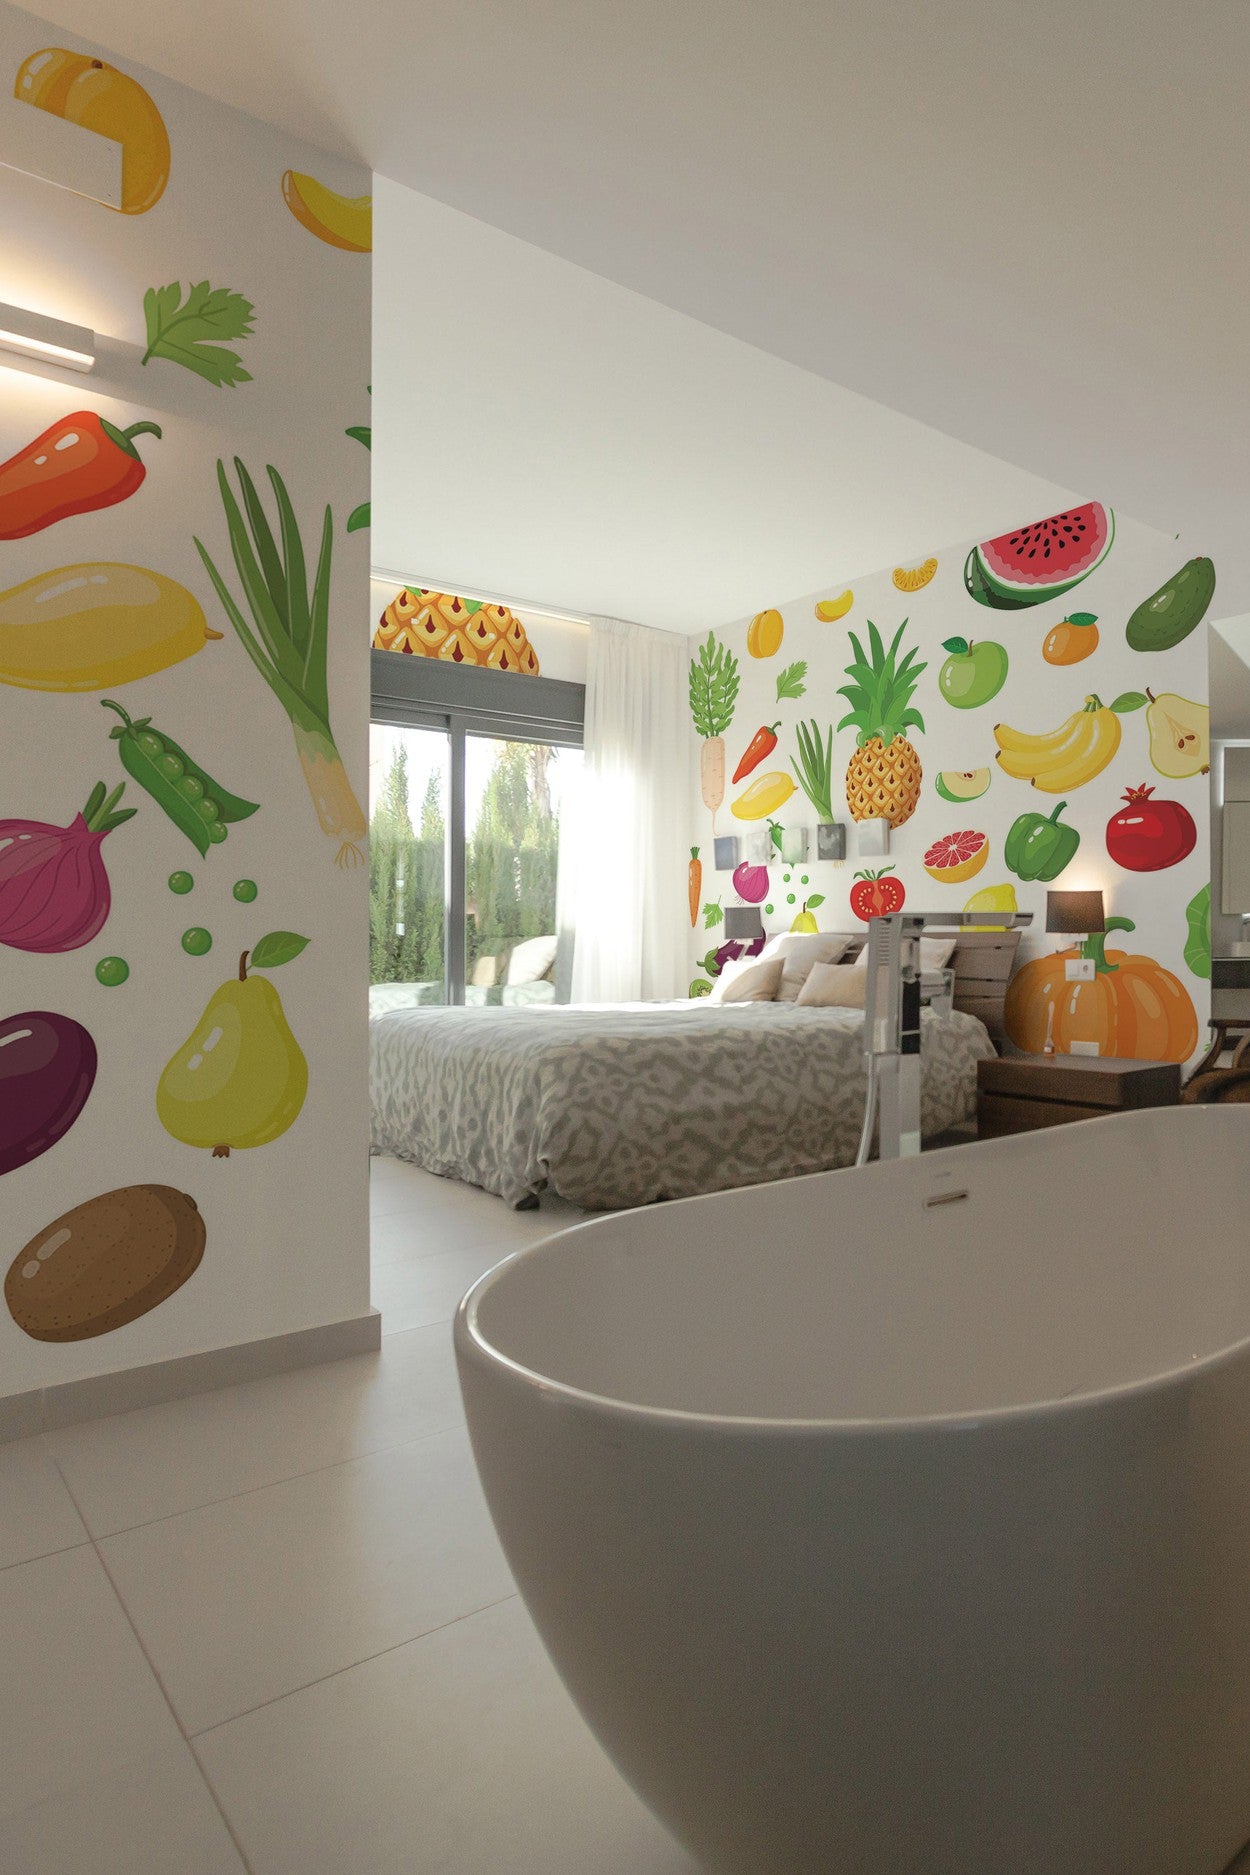 Interior of a modern bedroom featuring a wall mural with colorful fruit and vegetable illustrations.